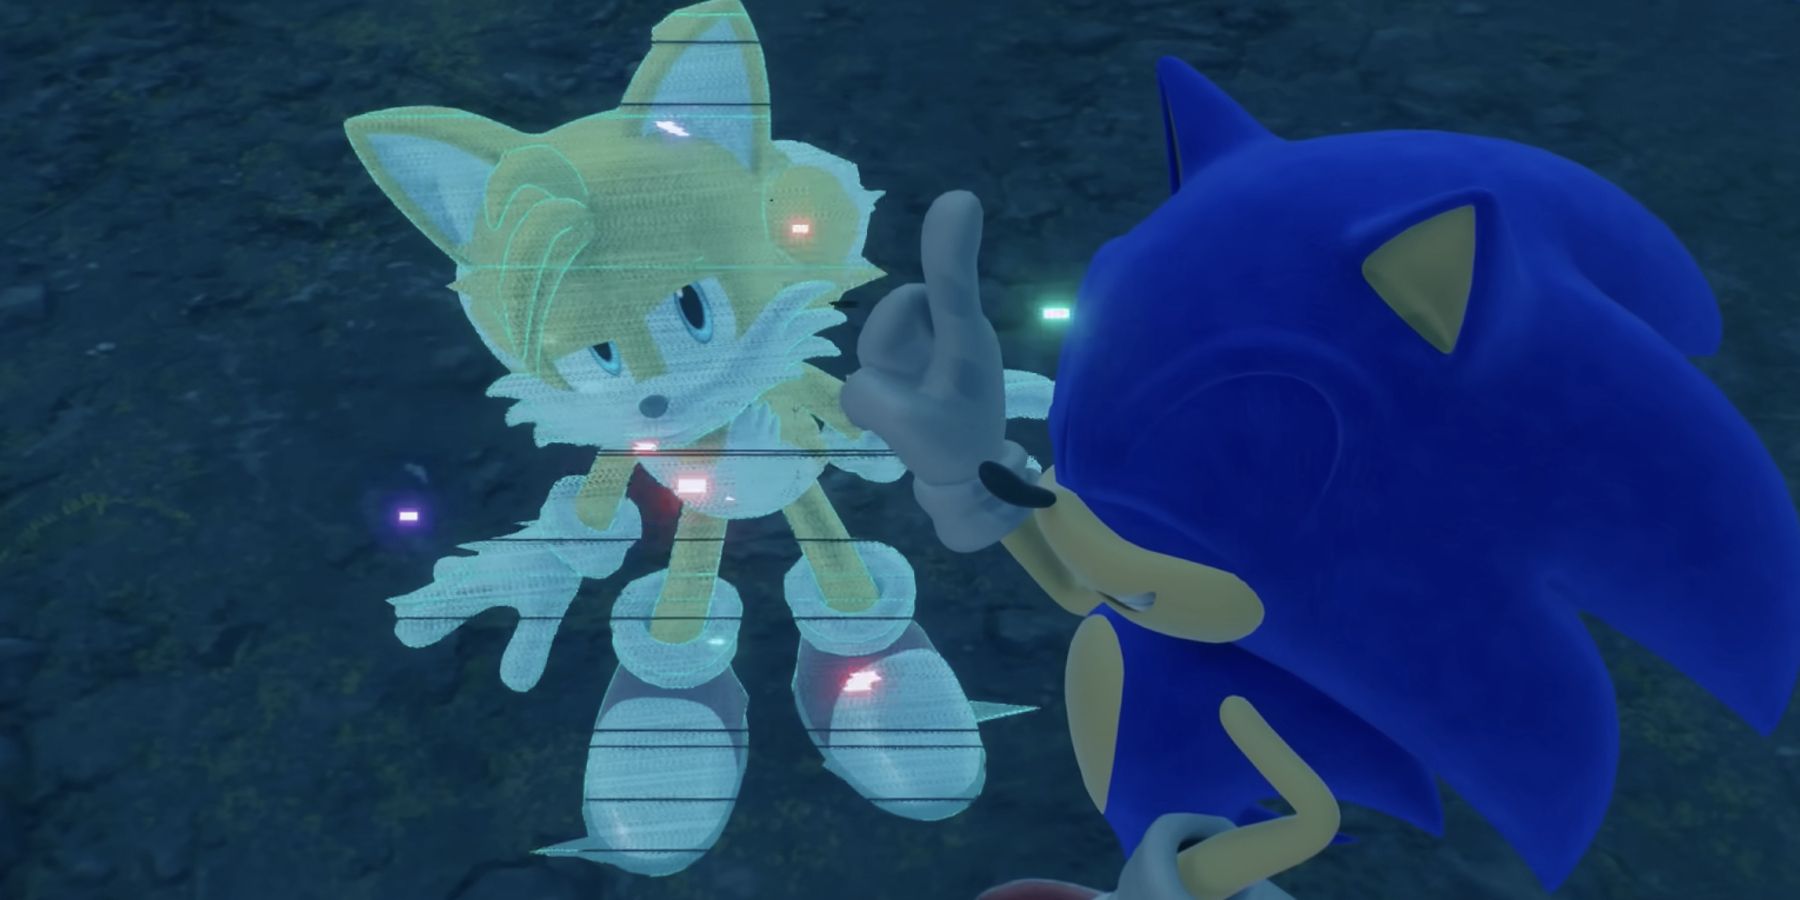 sonic-frontiers-miles-tails-prower-sonic-the-hedgehog-growing-up-conversation